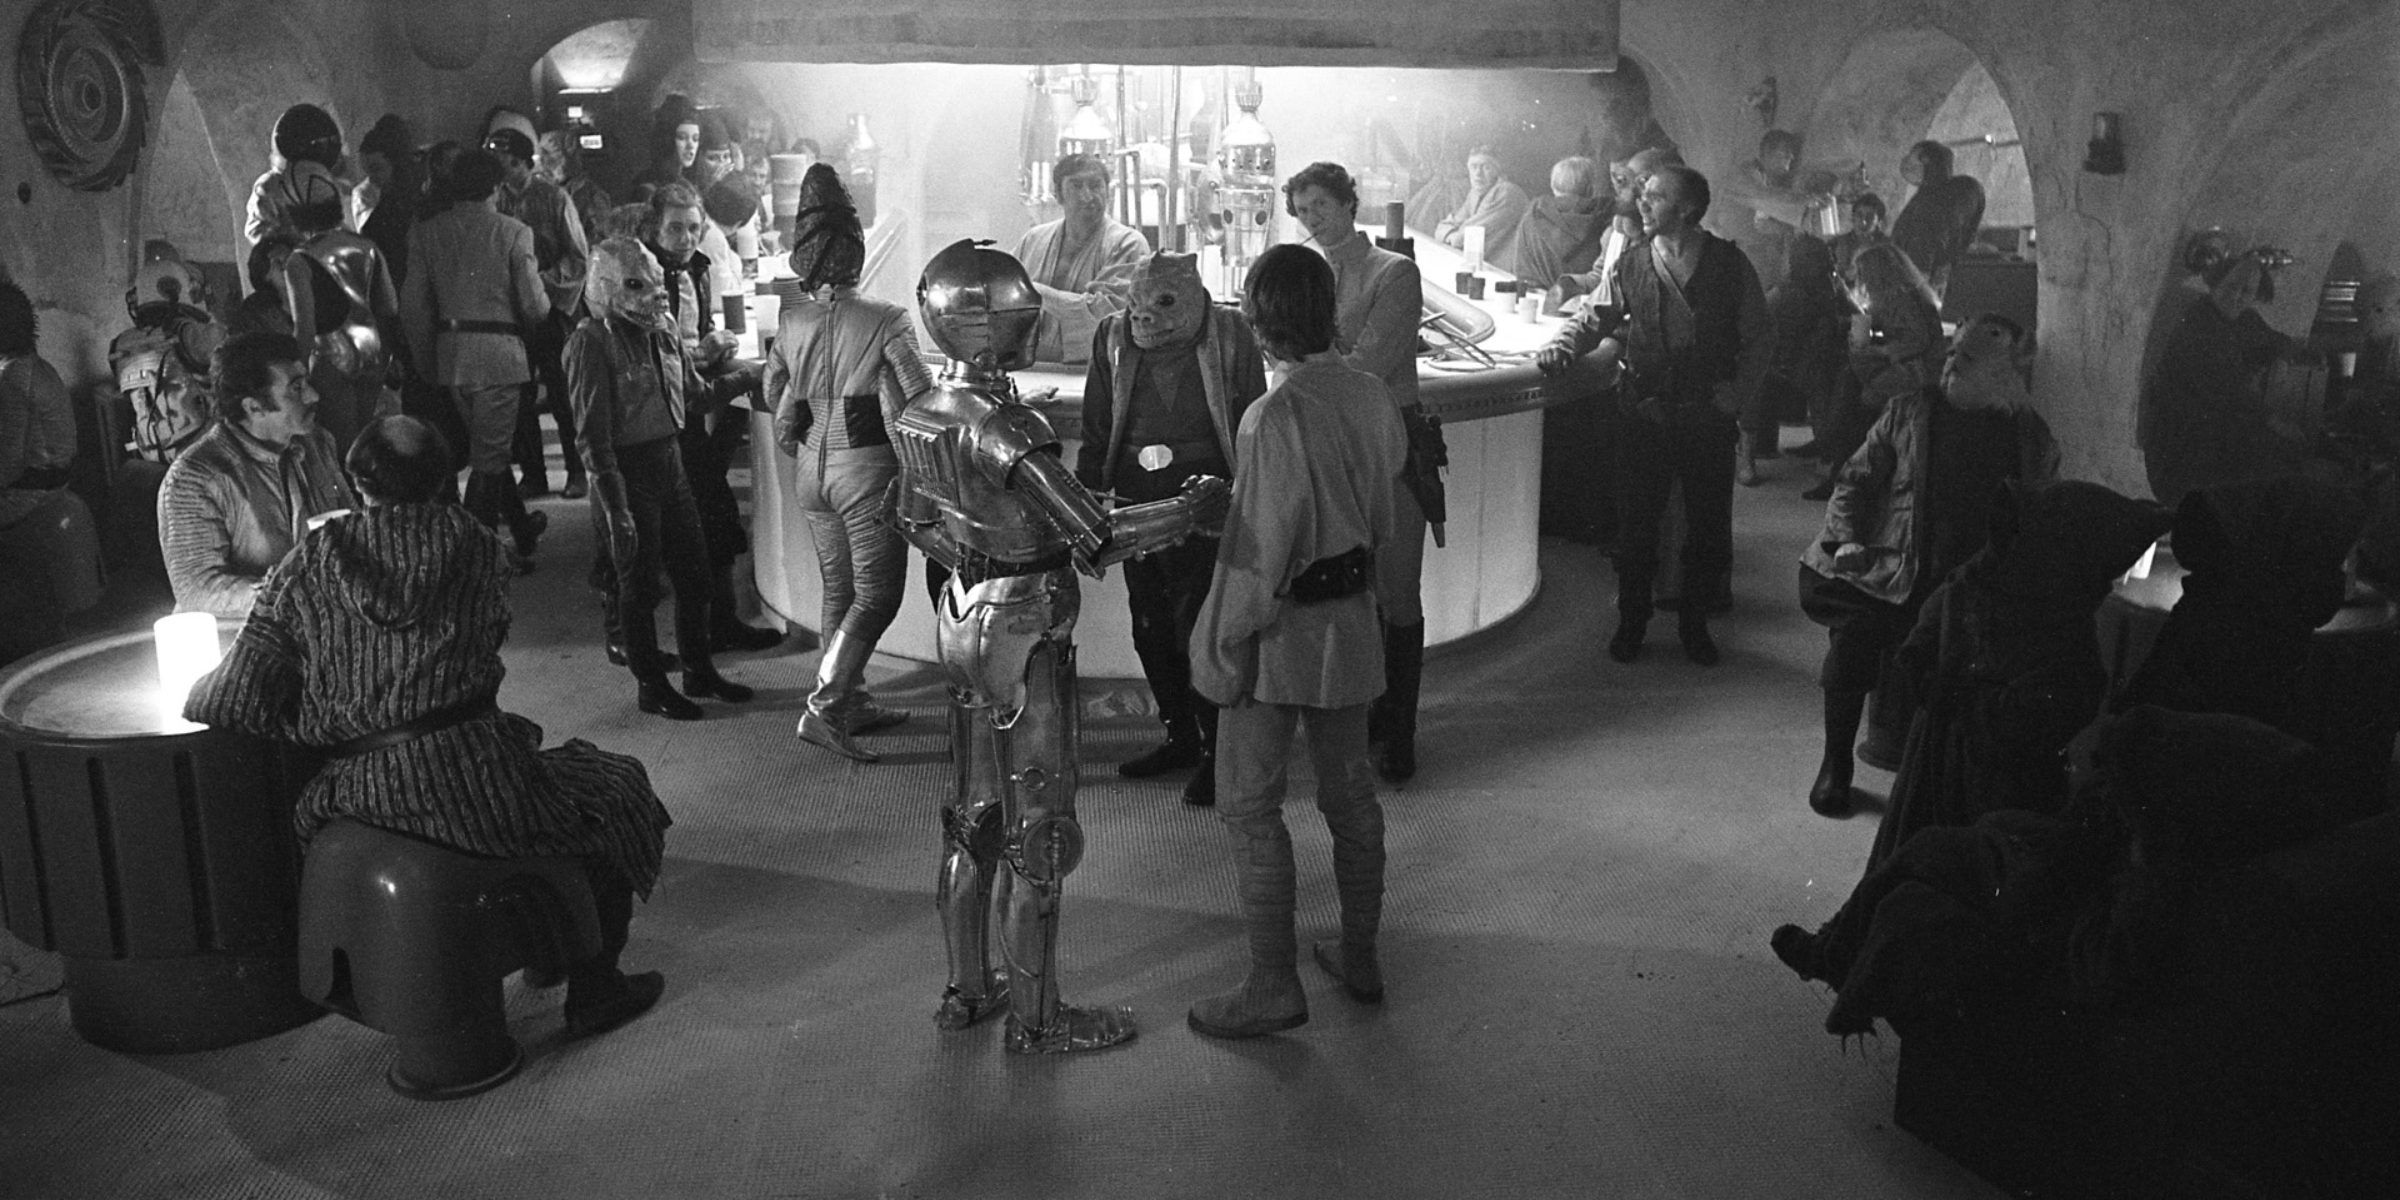 Poll: Who Is Your Favorite Mos Eisley Cantina Patron?